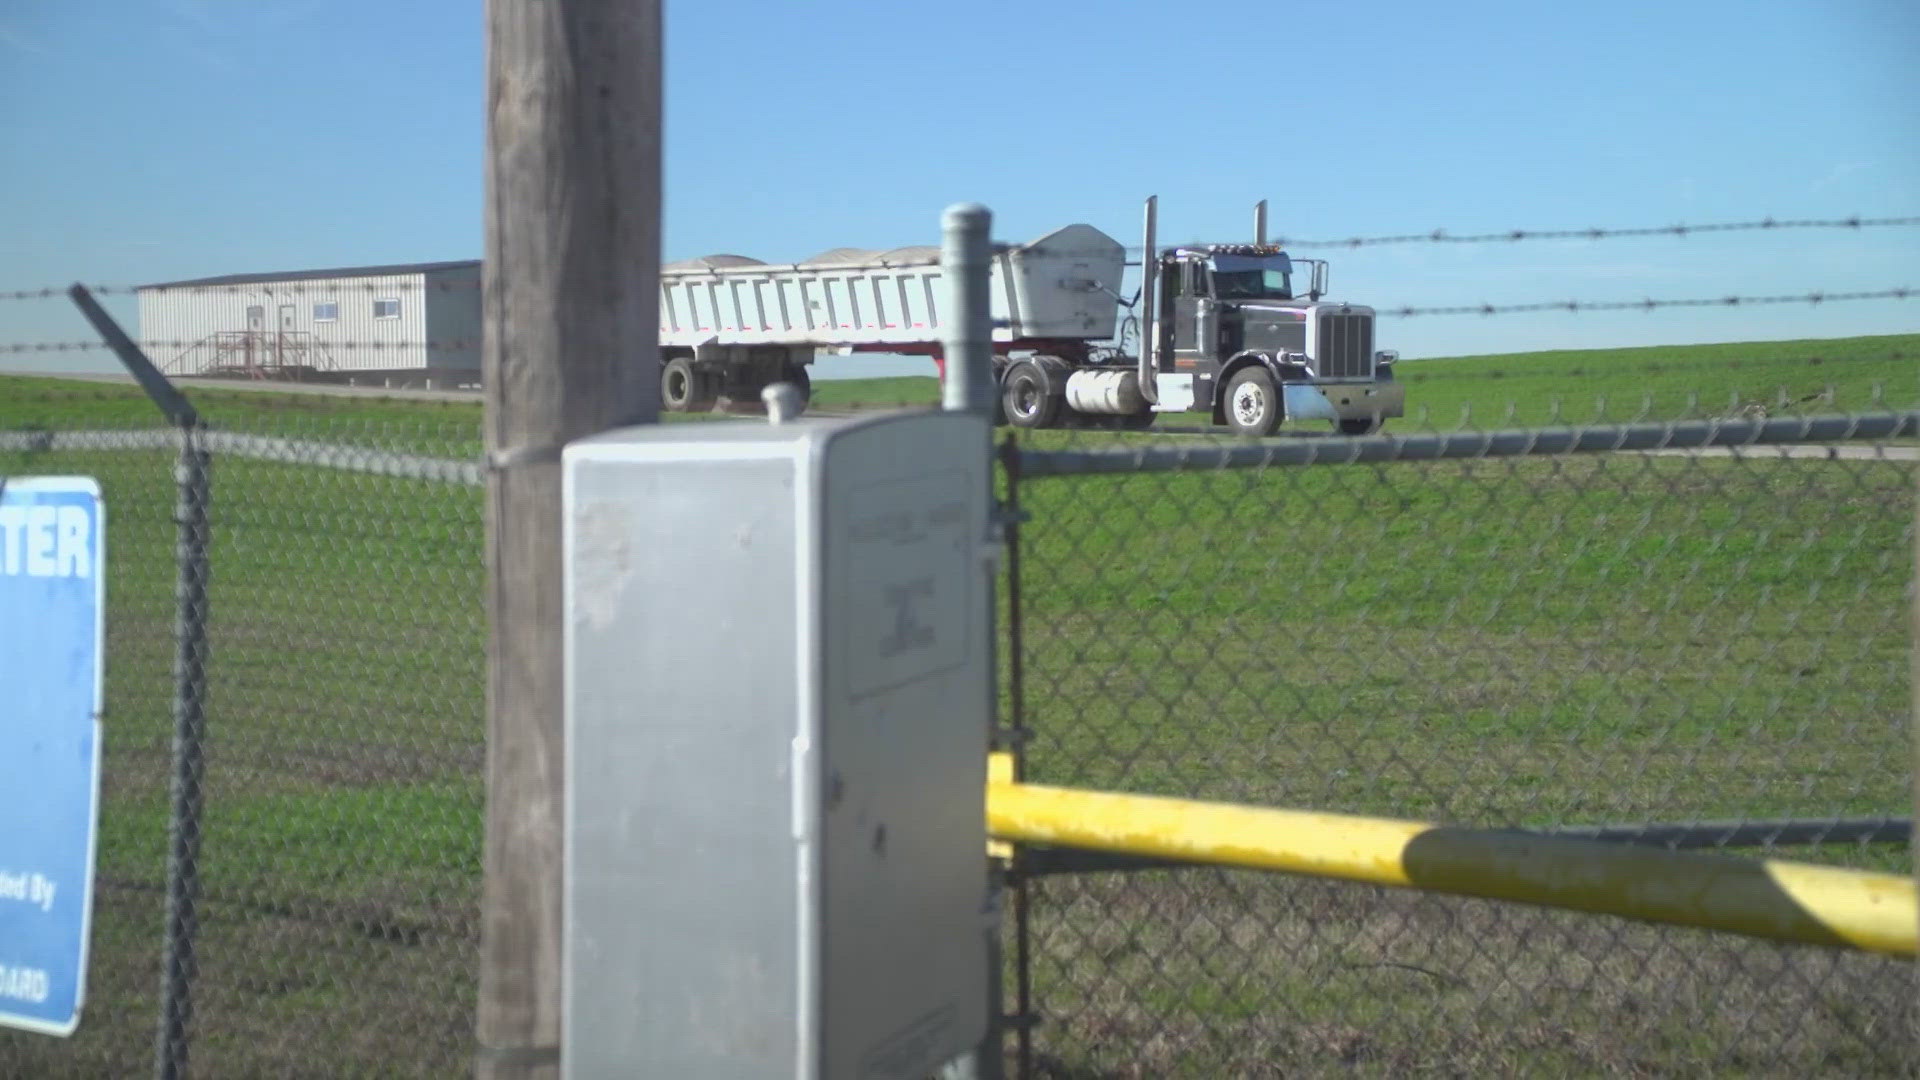 The fertilizer maker says its products are safe, and that the government supports using it as a valuable practice that recycles nutrients to farmland.